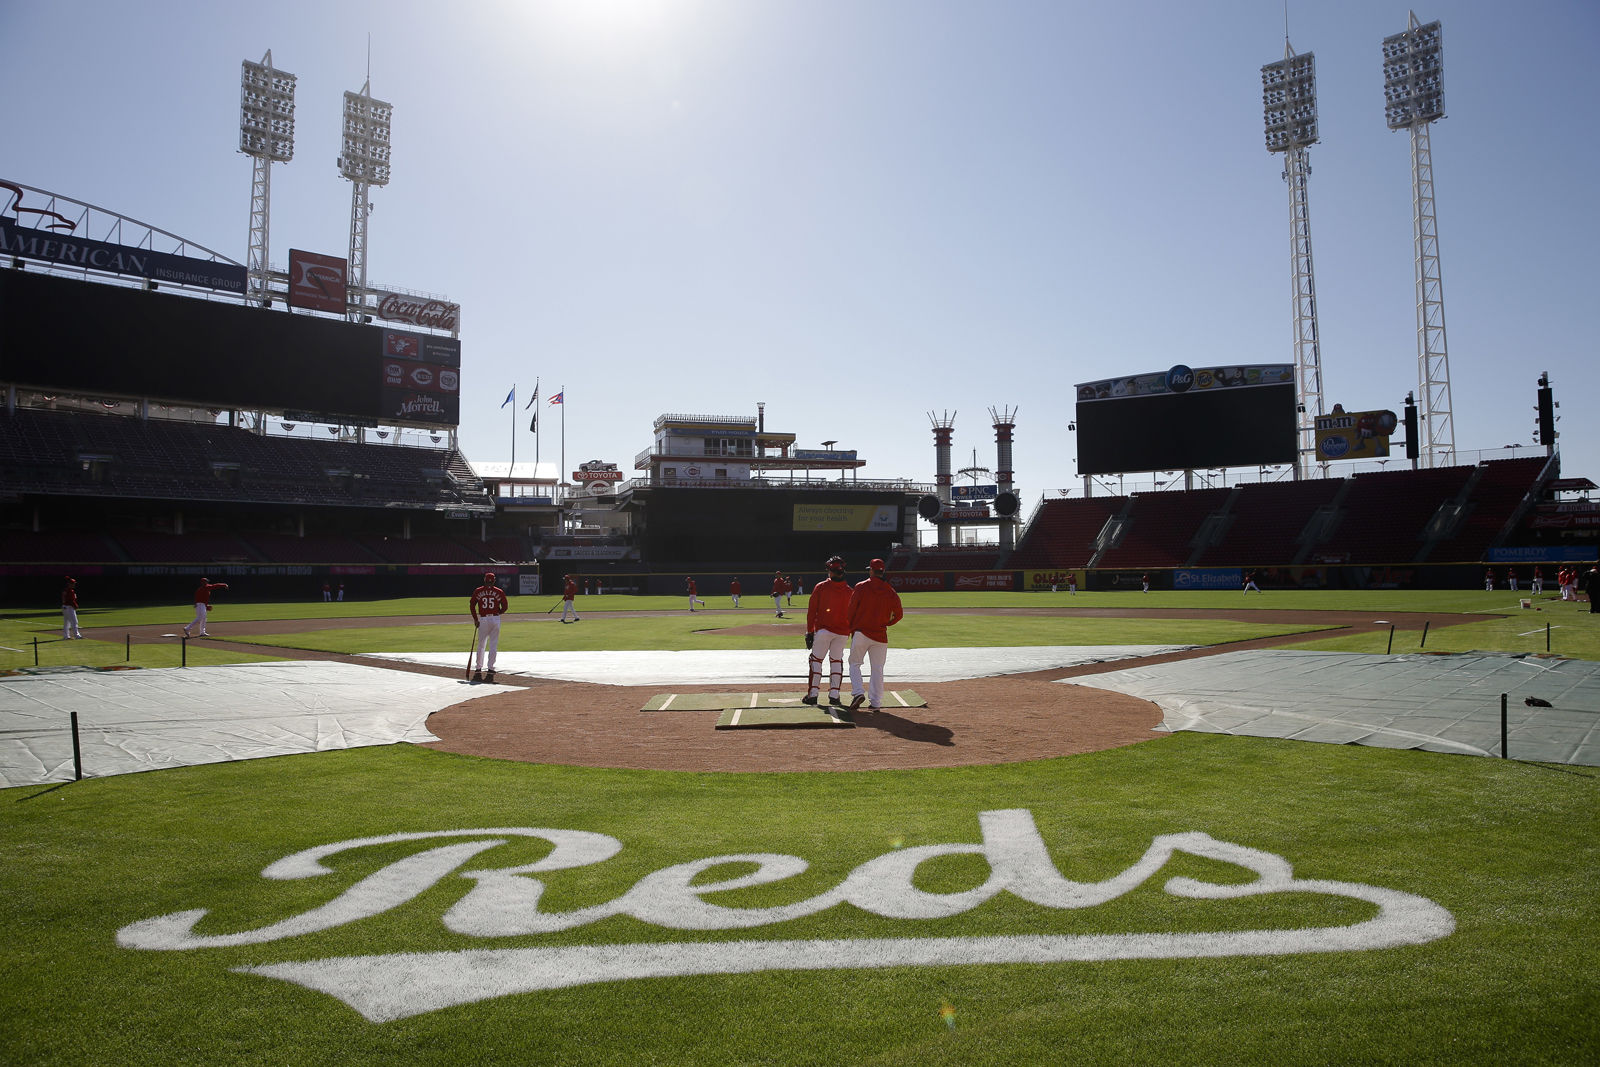 Great American Ballpark, home of the Cincinnati Reds, is No. 27 on the list. Built in 2002 on the shore of the Ohio River, it costs $55.17 to see the Reds play at home. File. (AP Photo/John Minchillo)